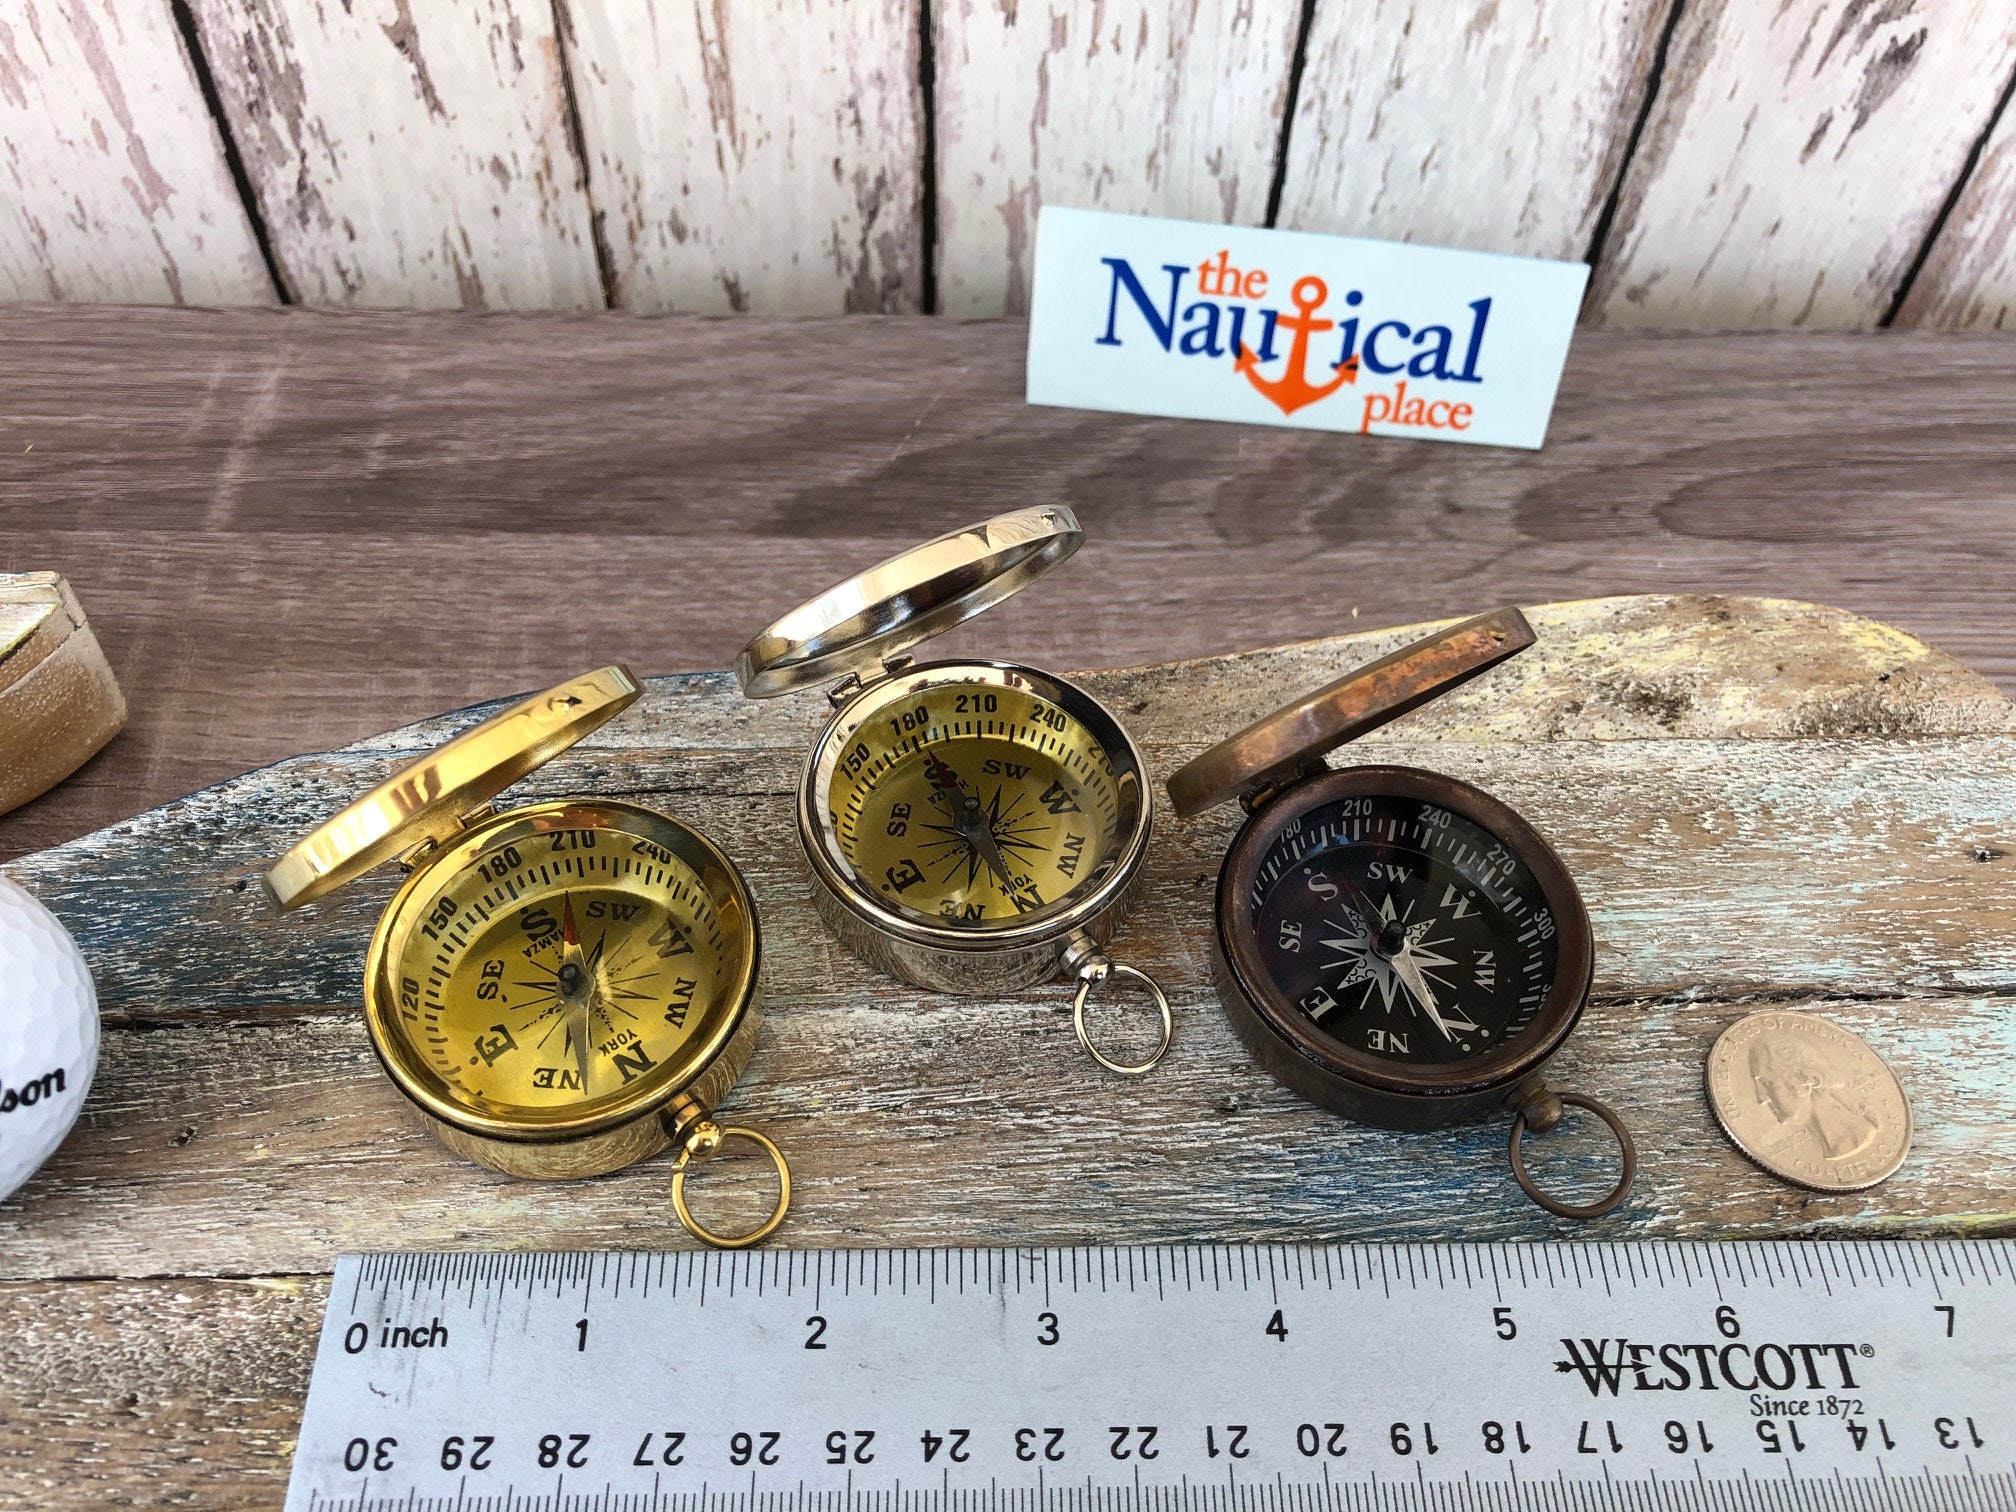 Brass Compass Necklace - With Lid, Push Button, Pocket Sundial - Antique,  Silver, Gold - Old Vintage Style - Nautical Keychain Jewelry